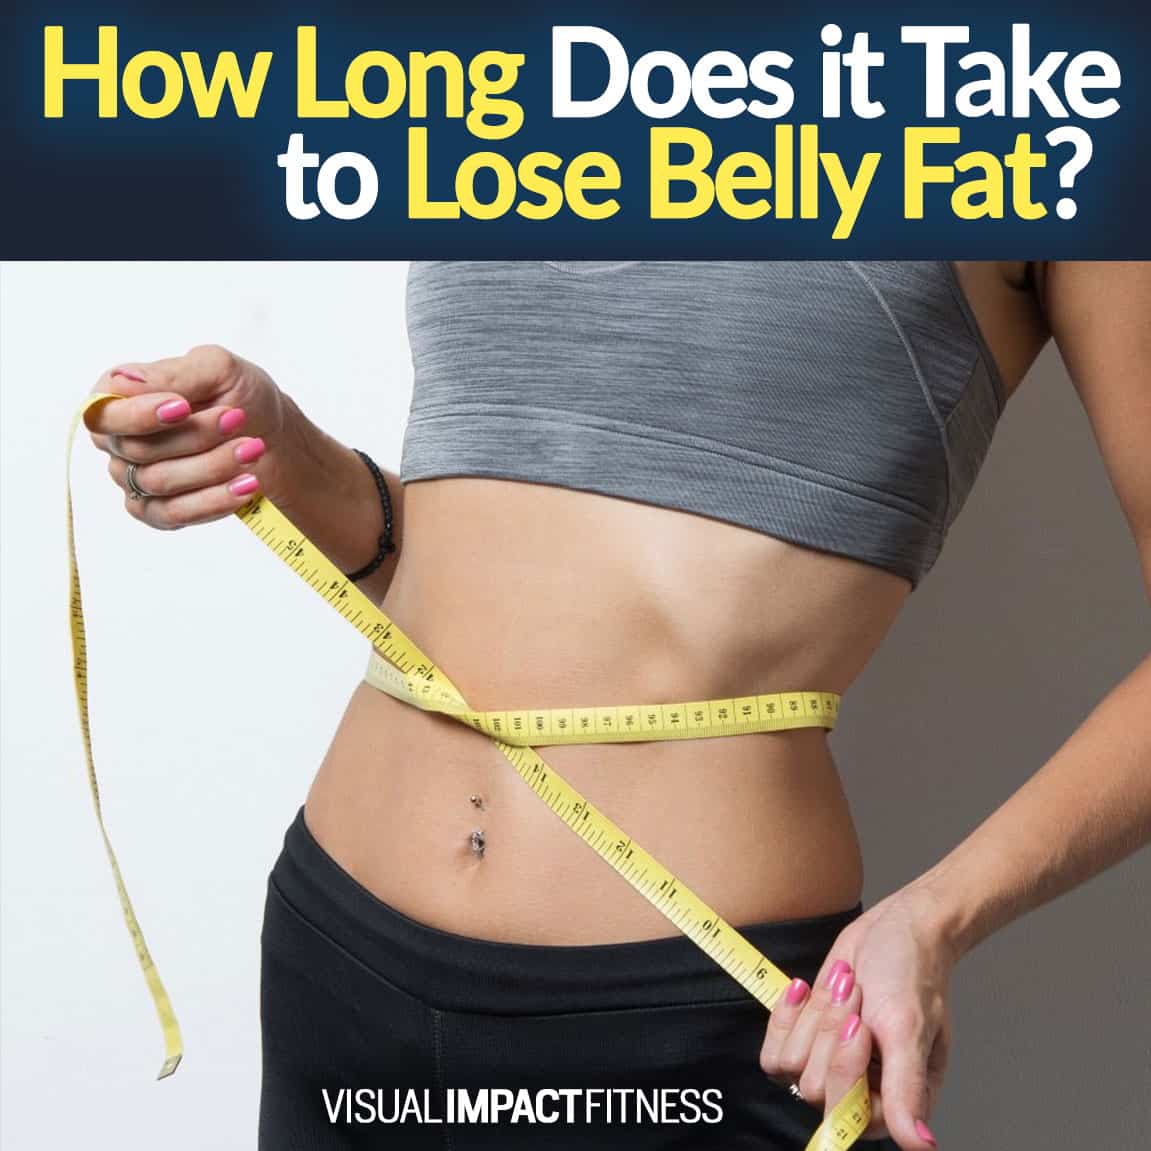 How Long Does It Take to Lose Belly Fat?